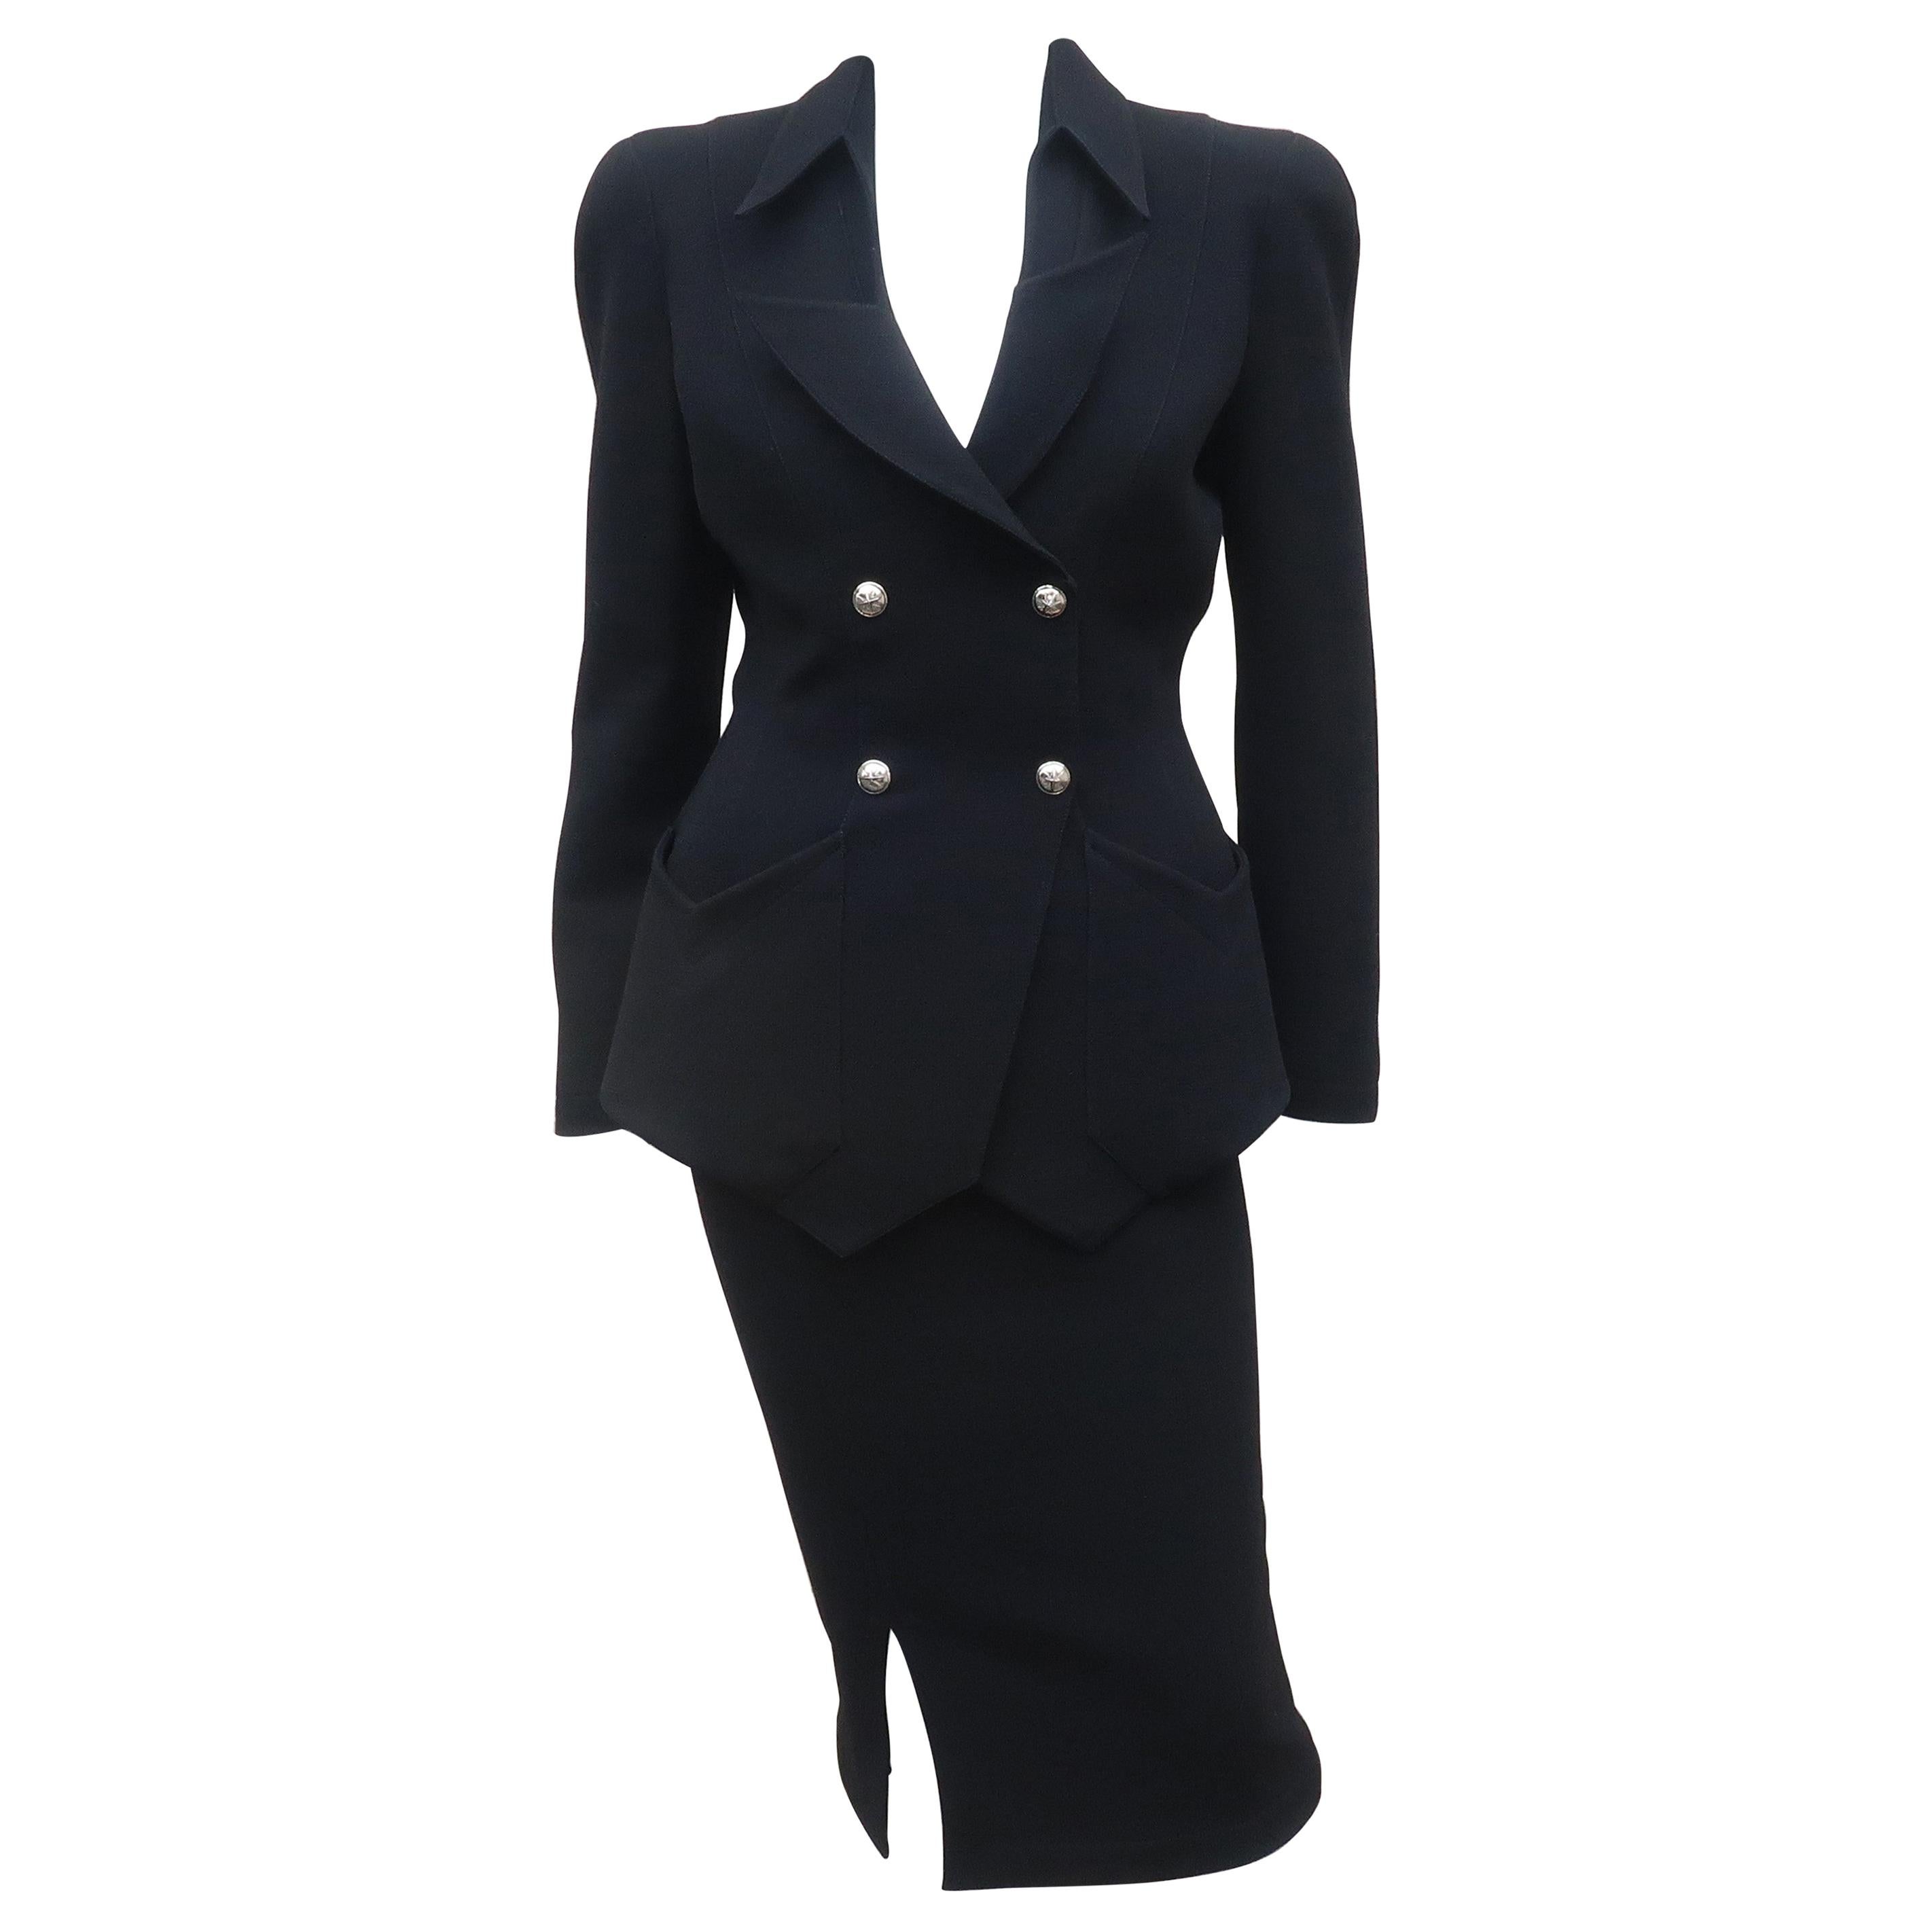 Sharp Thierry Mugler Wool Houndstooth Skirt Suit 1980s Vintage For Sale ...